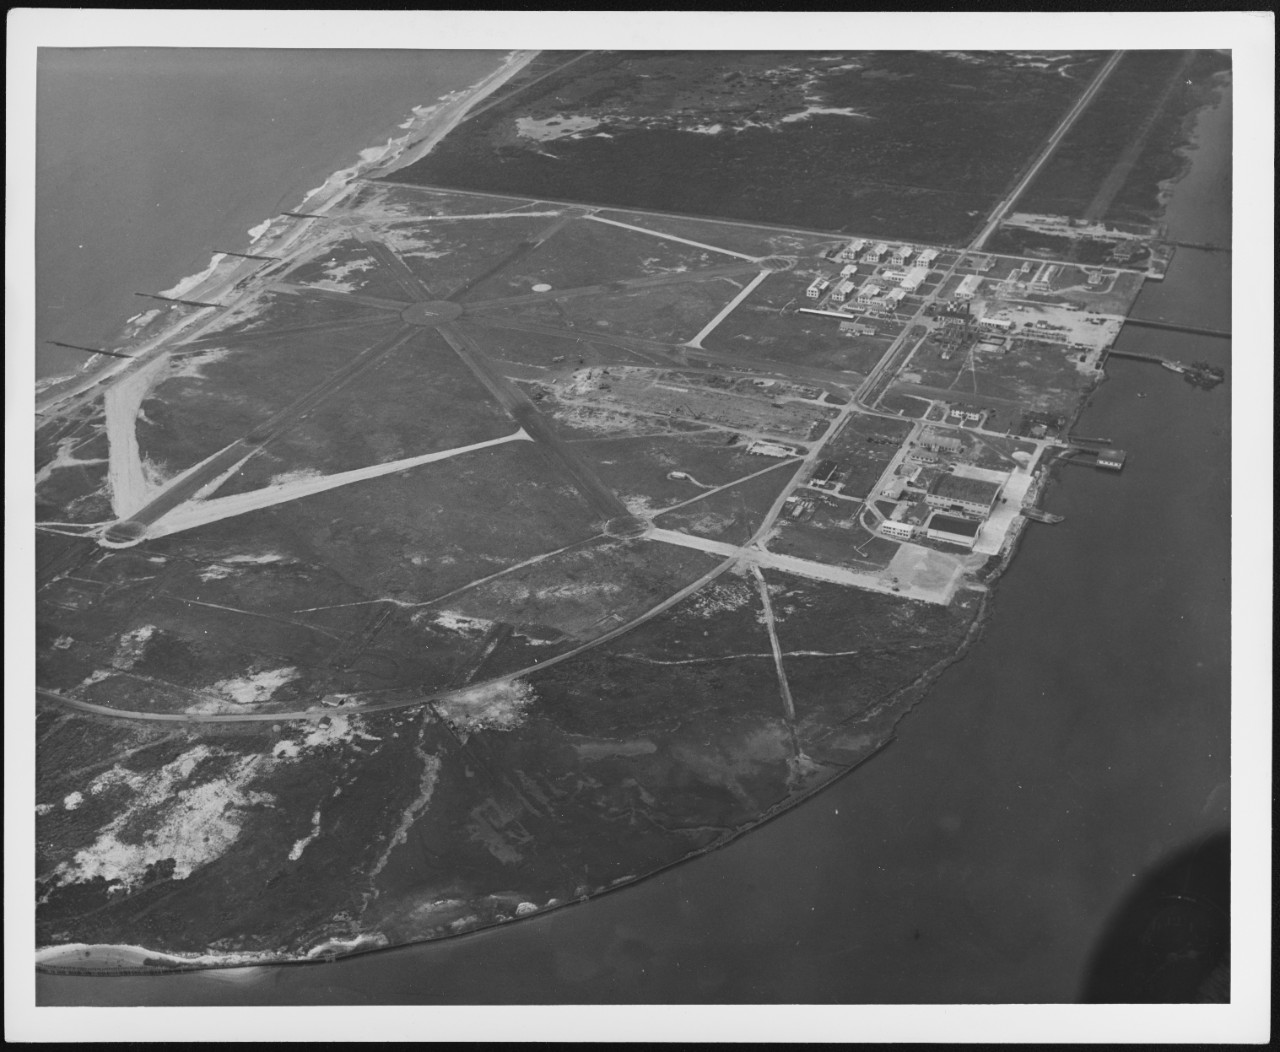 U.S. Naval Air Station, Cape May, New Jersey